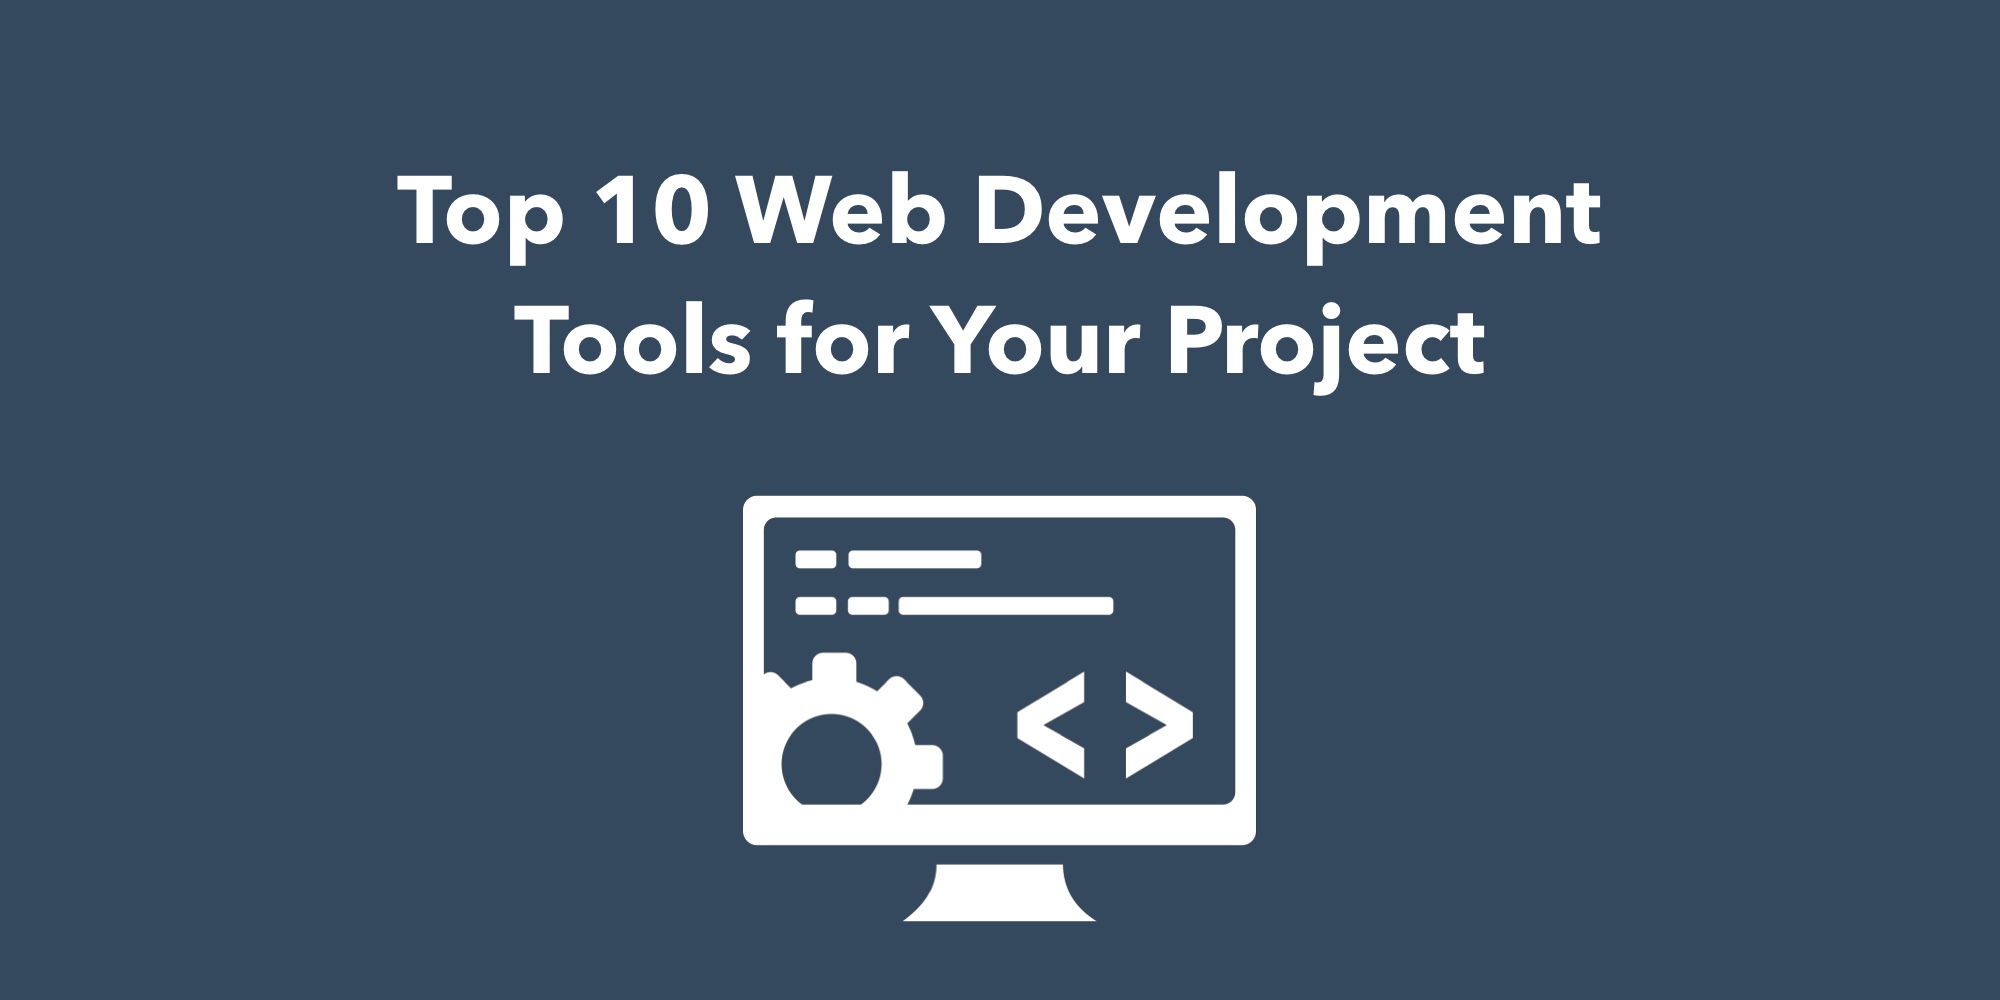 Top 10 Web Development Tools for Your Project